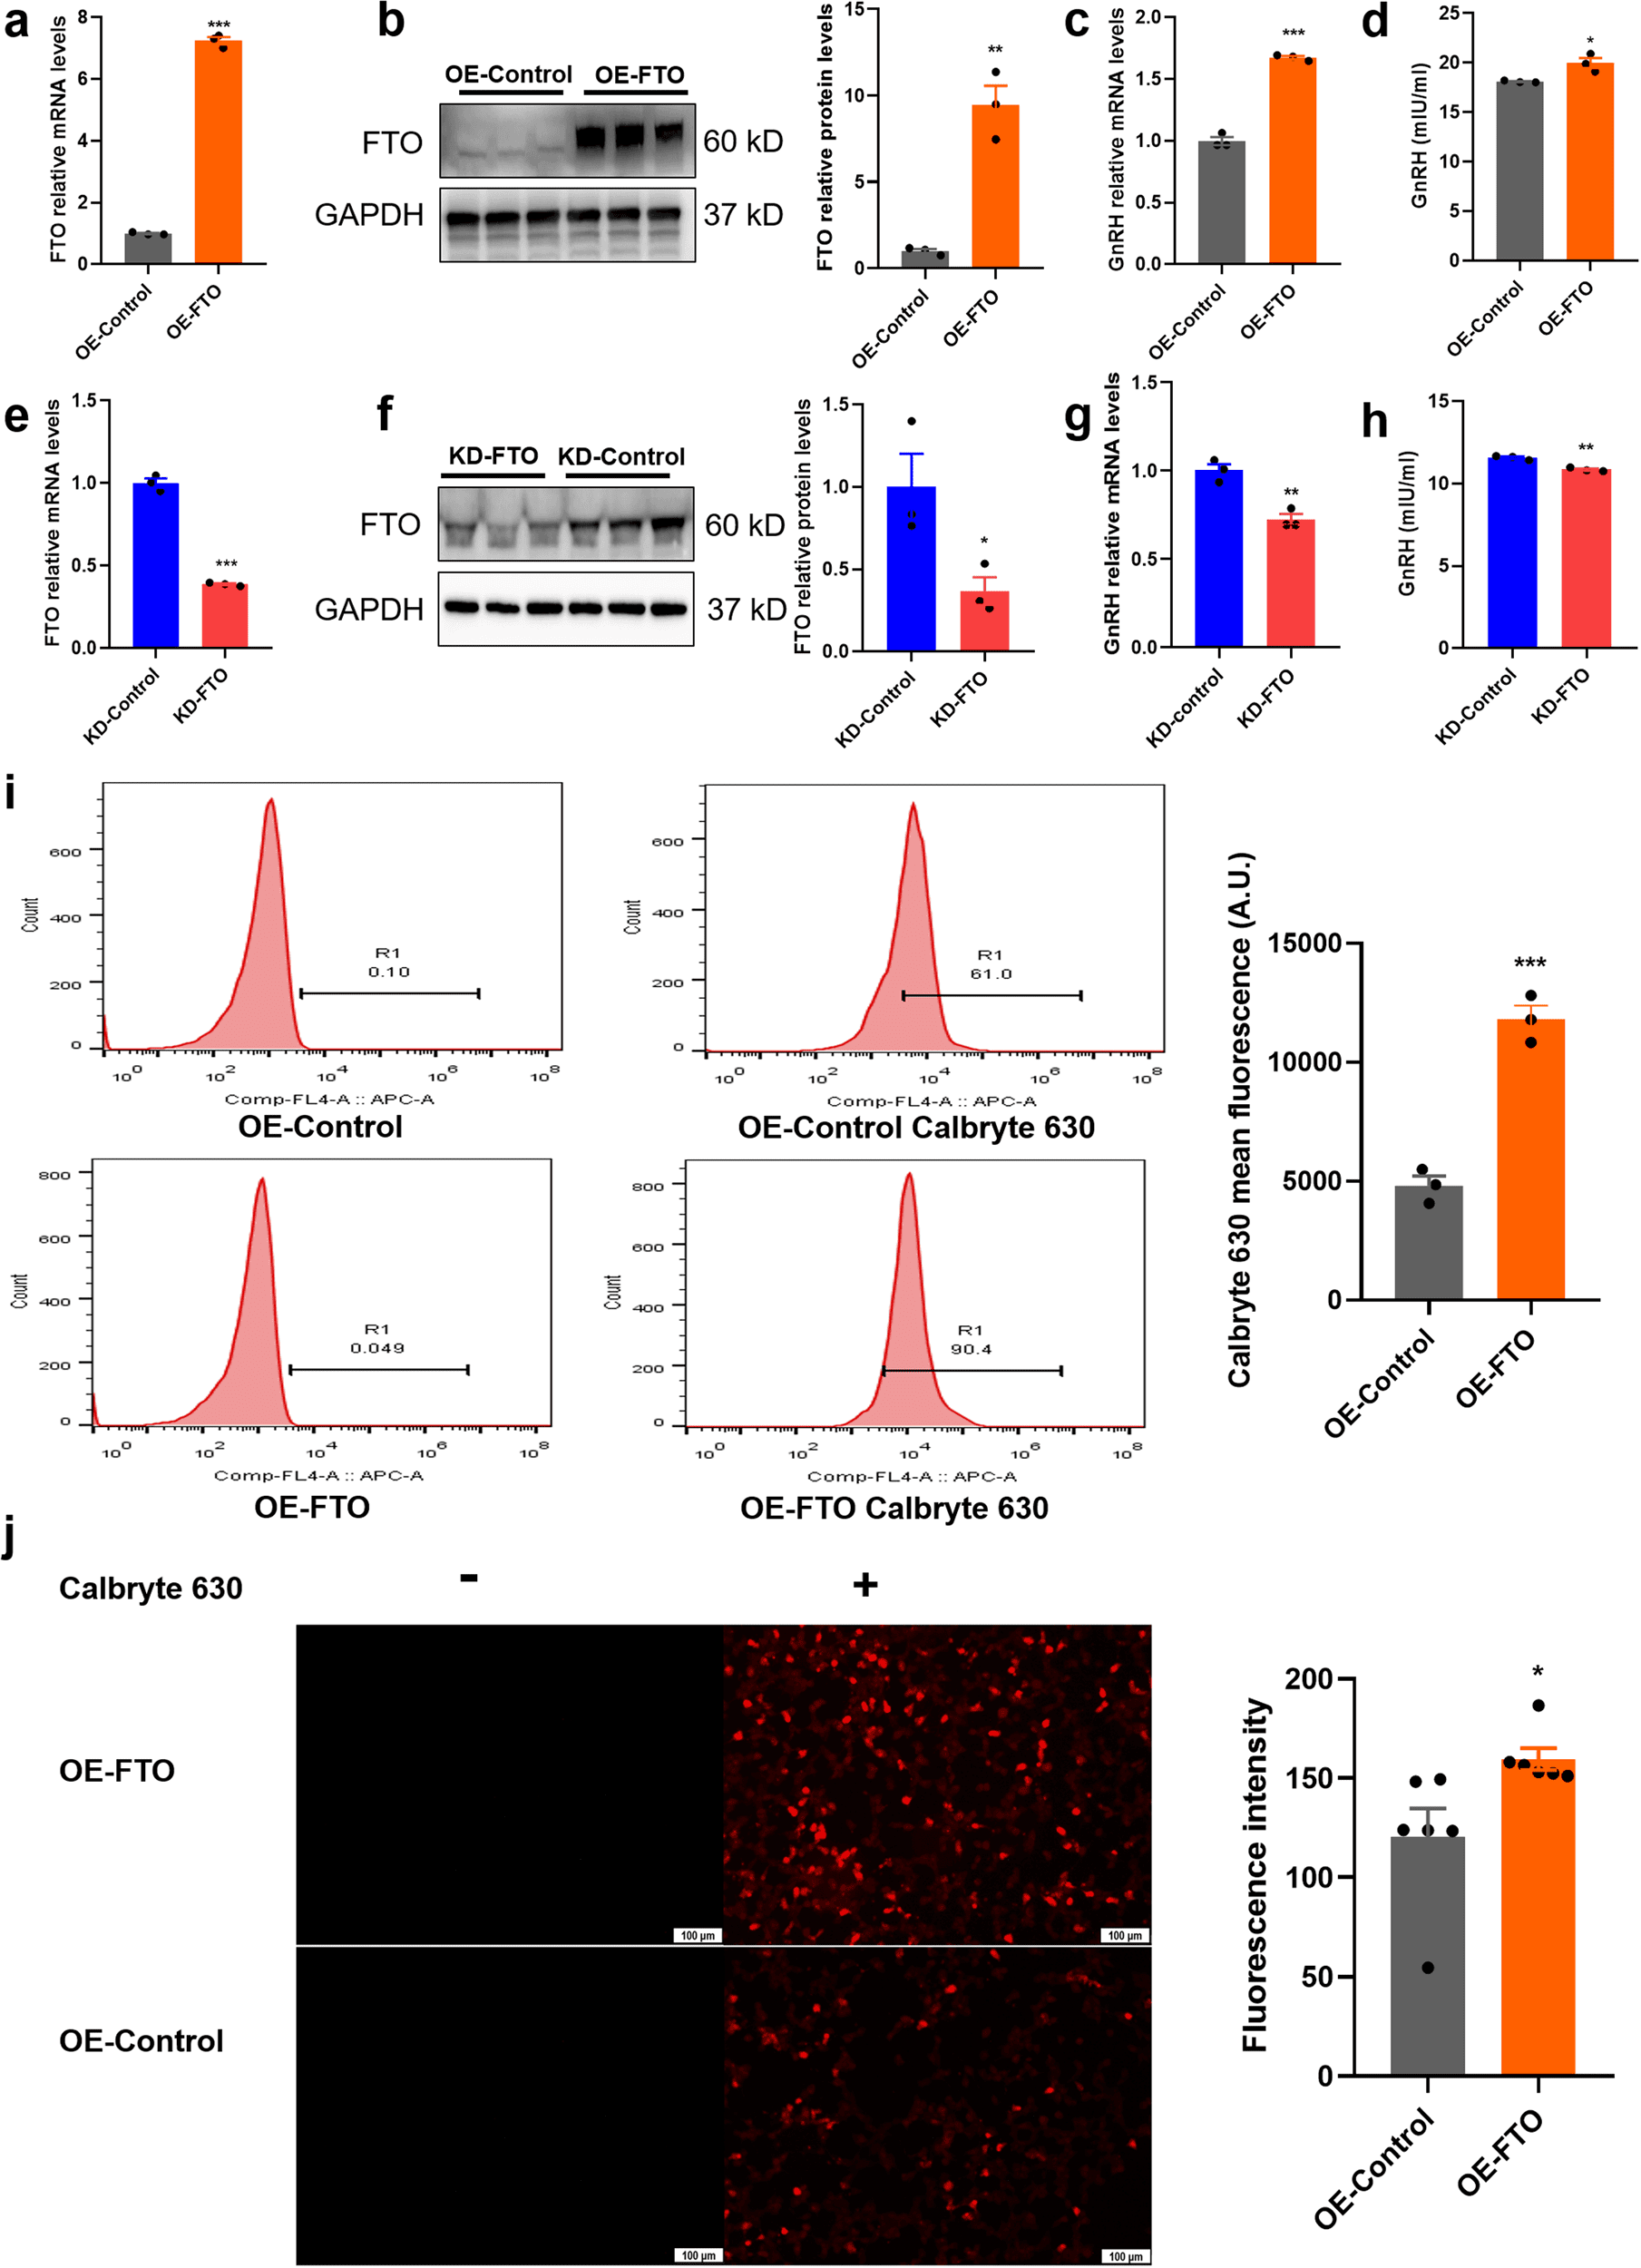 a, b Overexpression of FTO (OE-FTO) in GT1-7 cells as confirmed by qPCR and western blotting (n = 3). c GnRH mRNA levels detected by qPCR in OE-FTO cells (n = 3). d GnRH abundance in OE-FTO cells as determined by ELISA (n = 3). e, f Knockdown of FTO (KD-FTO) in GT1-7 cells as determined by qPCR and western blotting (n = 3). g Expression of GnRH mRNA as determined by qPCR (n = 3). h Protein expression of GnRH in KD-FTO cells as determined by ELISA (n = 3). i Free Ca2+ concentrations of OE-Control and OE-FTO GT1-7 cells as determined by fluorescence of Calbryte-630 with flow cytometry as described in the Methods (n = 3). Left: flow cytometric histograms of Calbryte-630 and gating with no Calbryte-630 probe as background values. Right: quantitative analysis of cell fluorescence for Calbryte-630. j Levels of intracellular free Ca2+ (red colour) between OF-FTO and OE-Control cells as determined by IF (n = 6). The concentration of fluorescence-labelled Calbryte 630 was 5 μM. Scale bars, 100 μm. The bars represent the means ± SEMs. *P < 0.05, **P < 0.01, ***P < 0.001, and ns, P > 0.05 versus OE-control or KD-control group by Student’s t test. Source: <b>FTO-mediated m6A demethylation regulates GnRH expression in the hypothalamus via the PLCβ3/Ca2+/CAMK signalling pathway</b> by Zang, S., Yin, X. & Li, P. <em>Commun Biol 6, 1297</em> Dec. 2023.